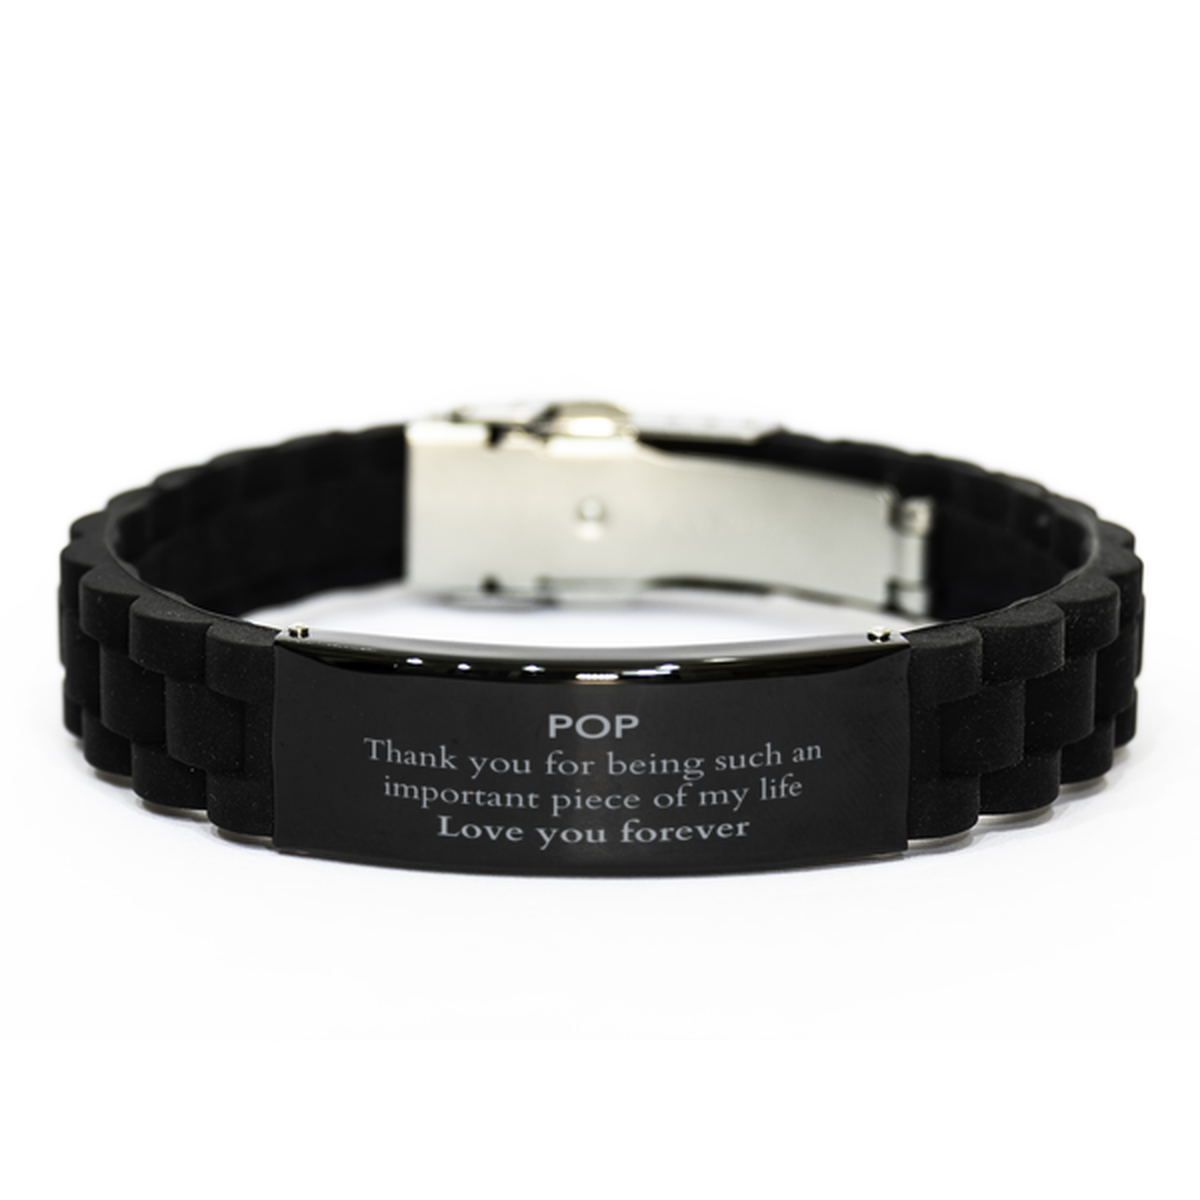 Appropriate Pop Black Glidelock Clasp Bracelet Epic Birthday Gifts for Pop Thank you for being such an important piece of my life Pop Christmas Mothers Fathers Day